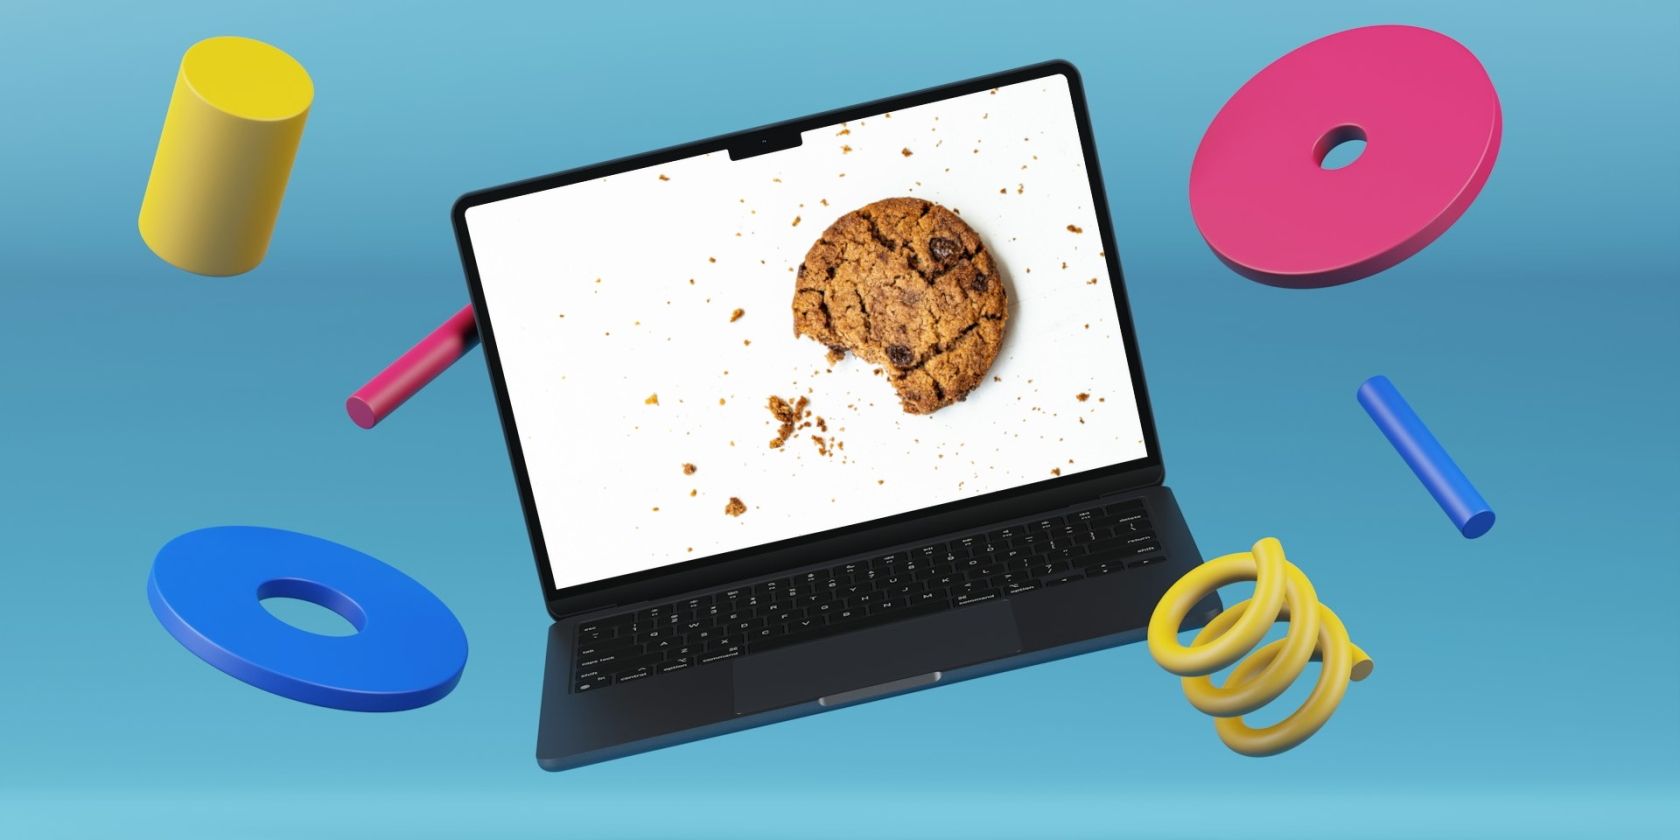 MacBook Air showing a cookie on the screen